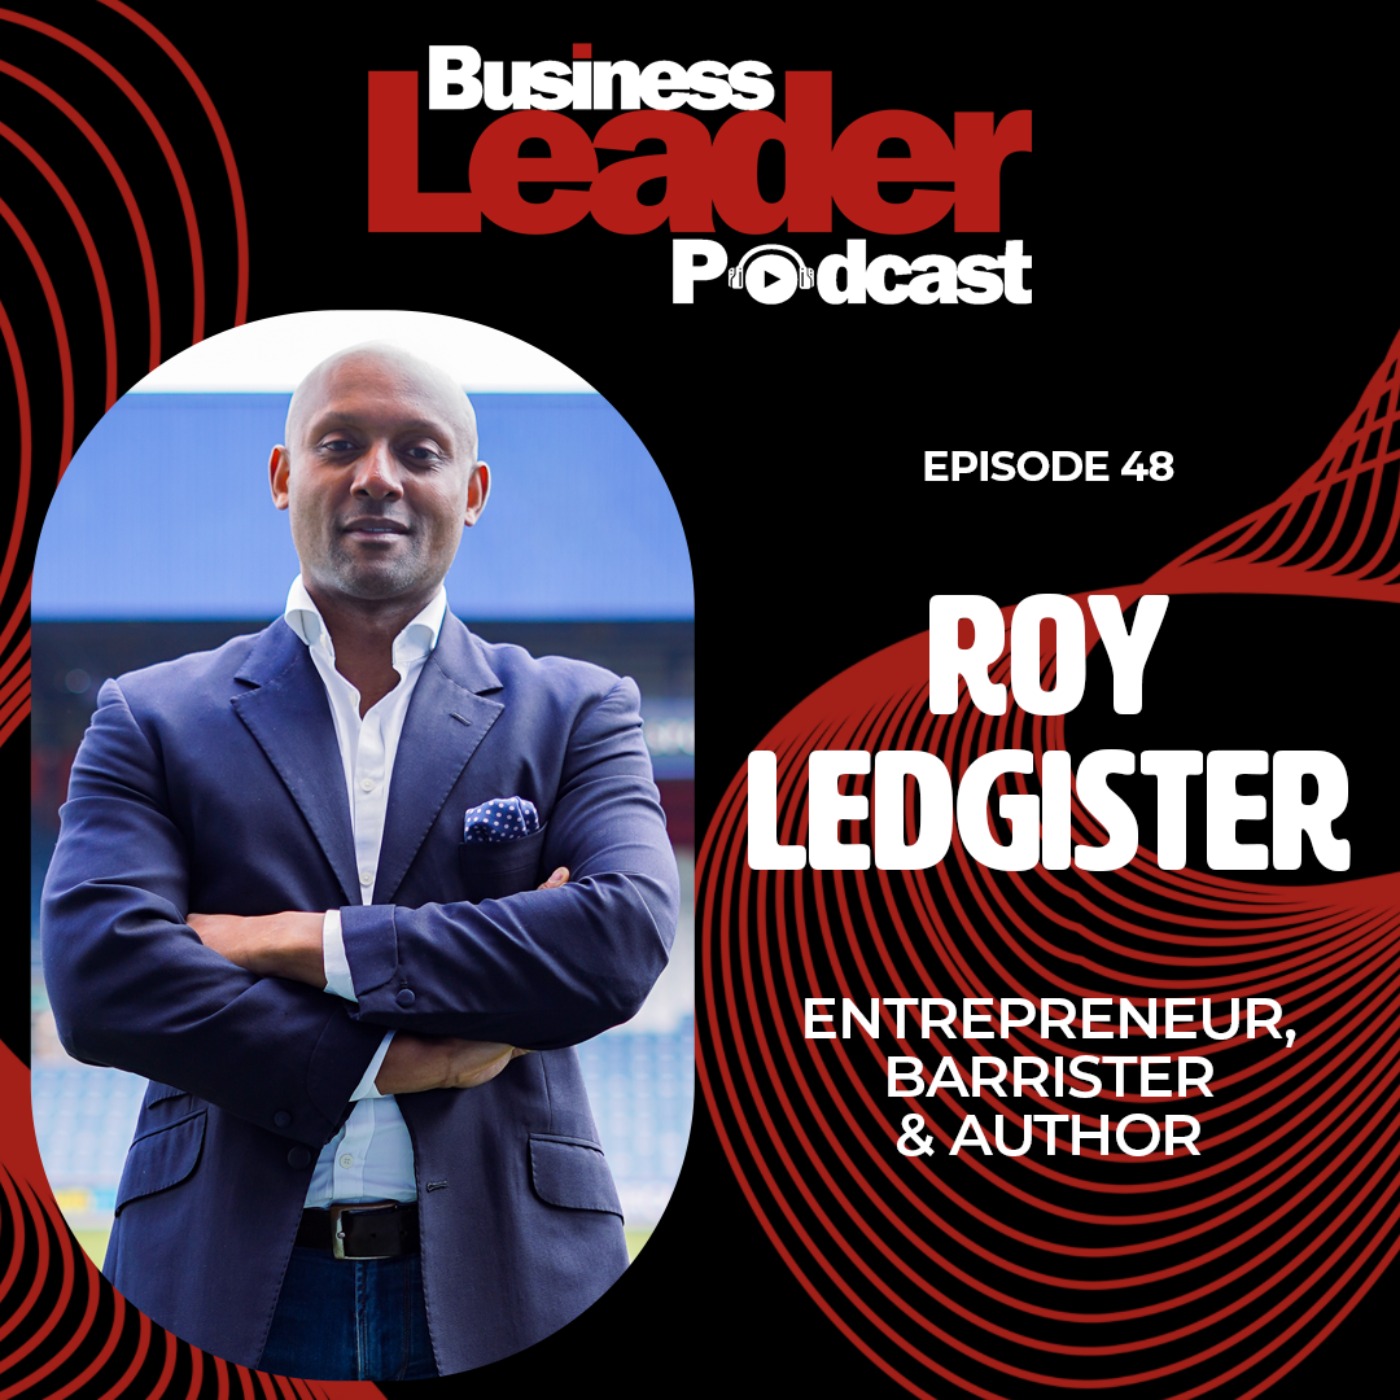 Roy Ledgister: The Millionaire Mentor who didn’t get the memo